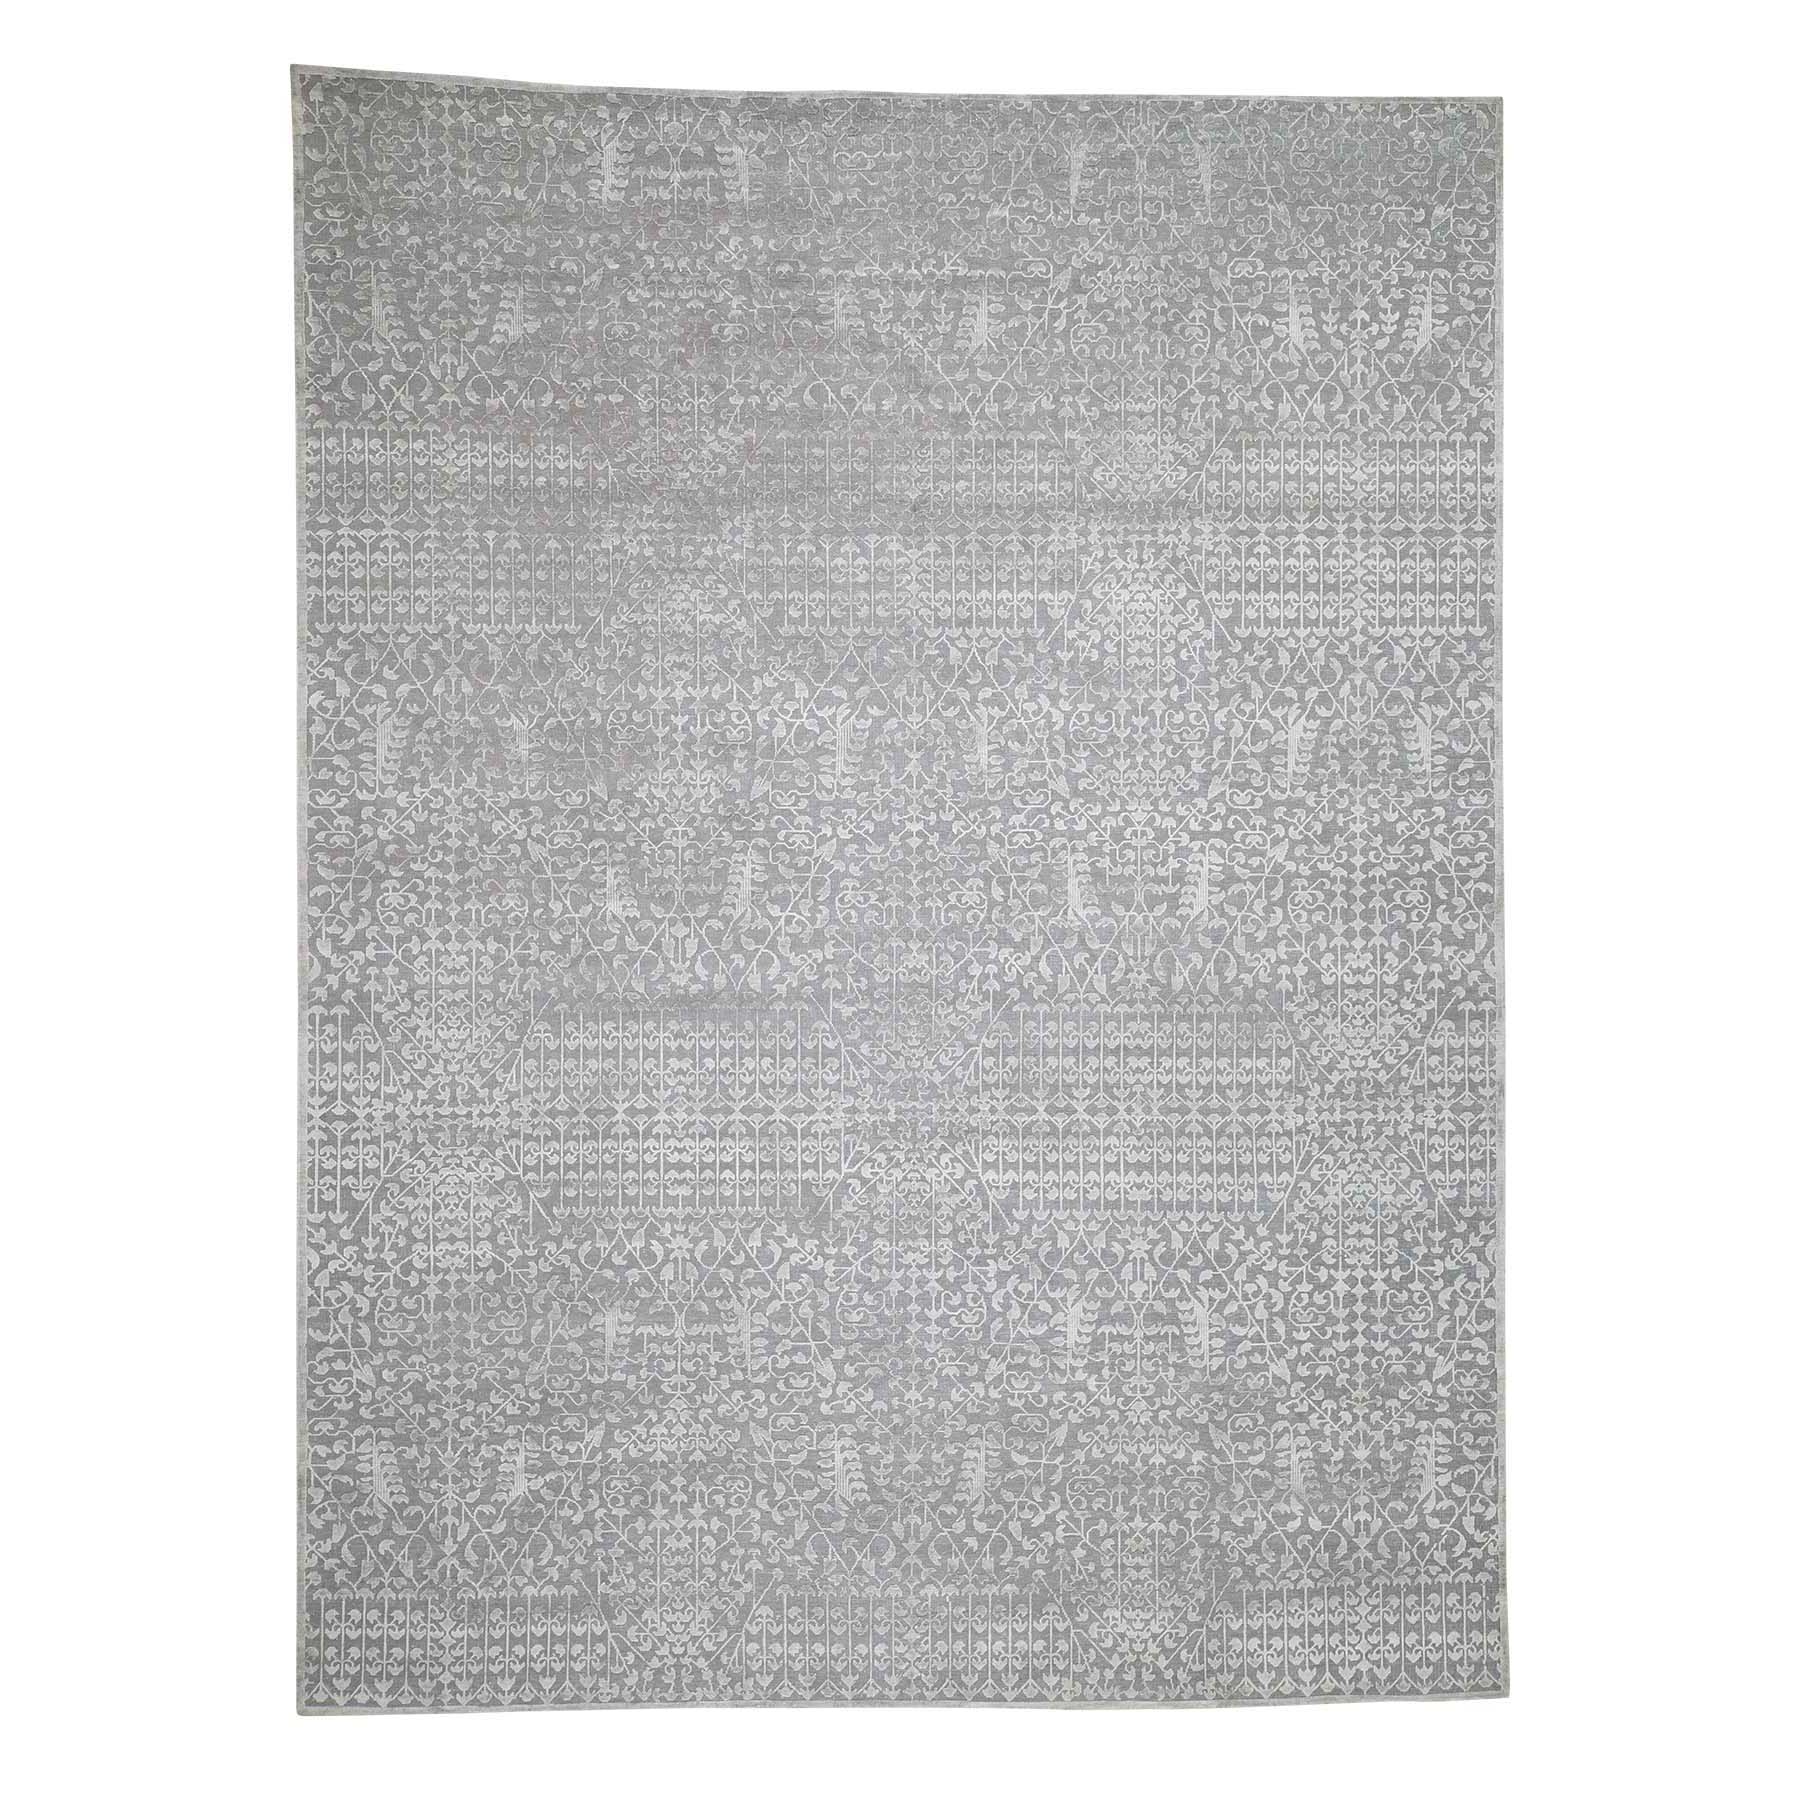 9'x12'1" Tone on Tone Silk with Textured Wool Hand Woven Oriental Rug 